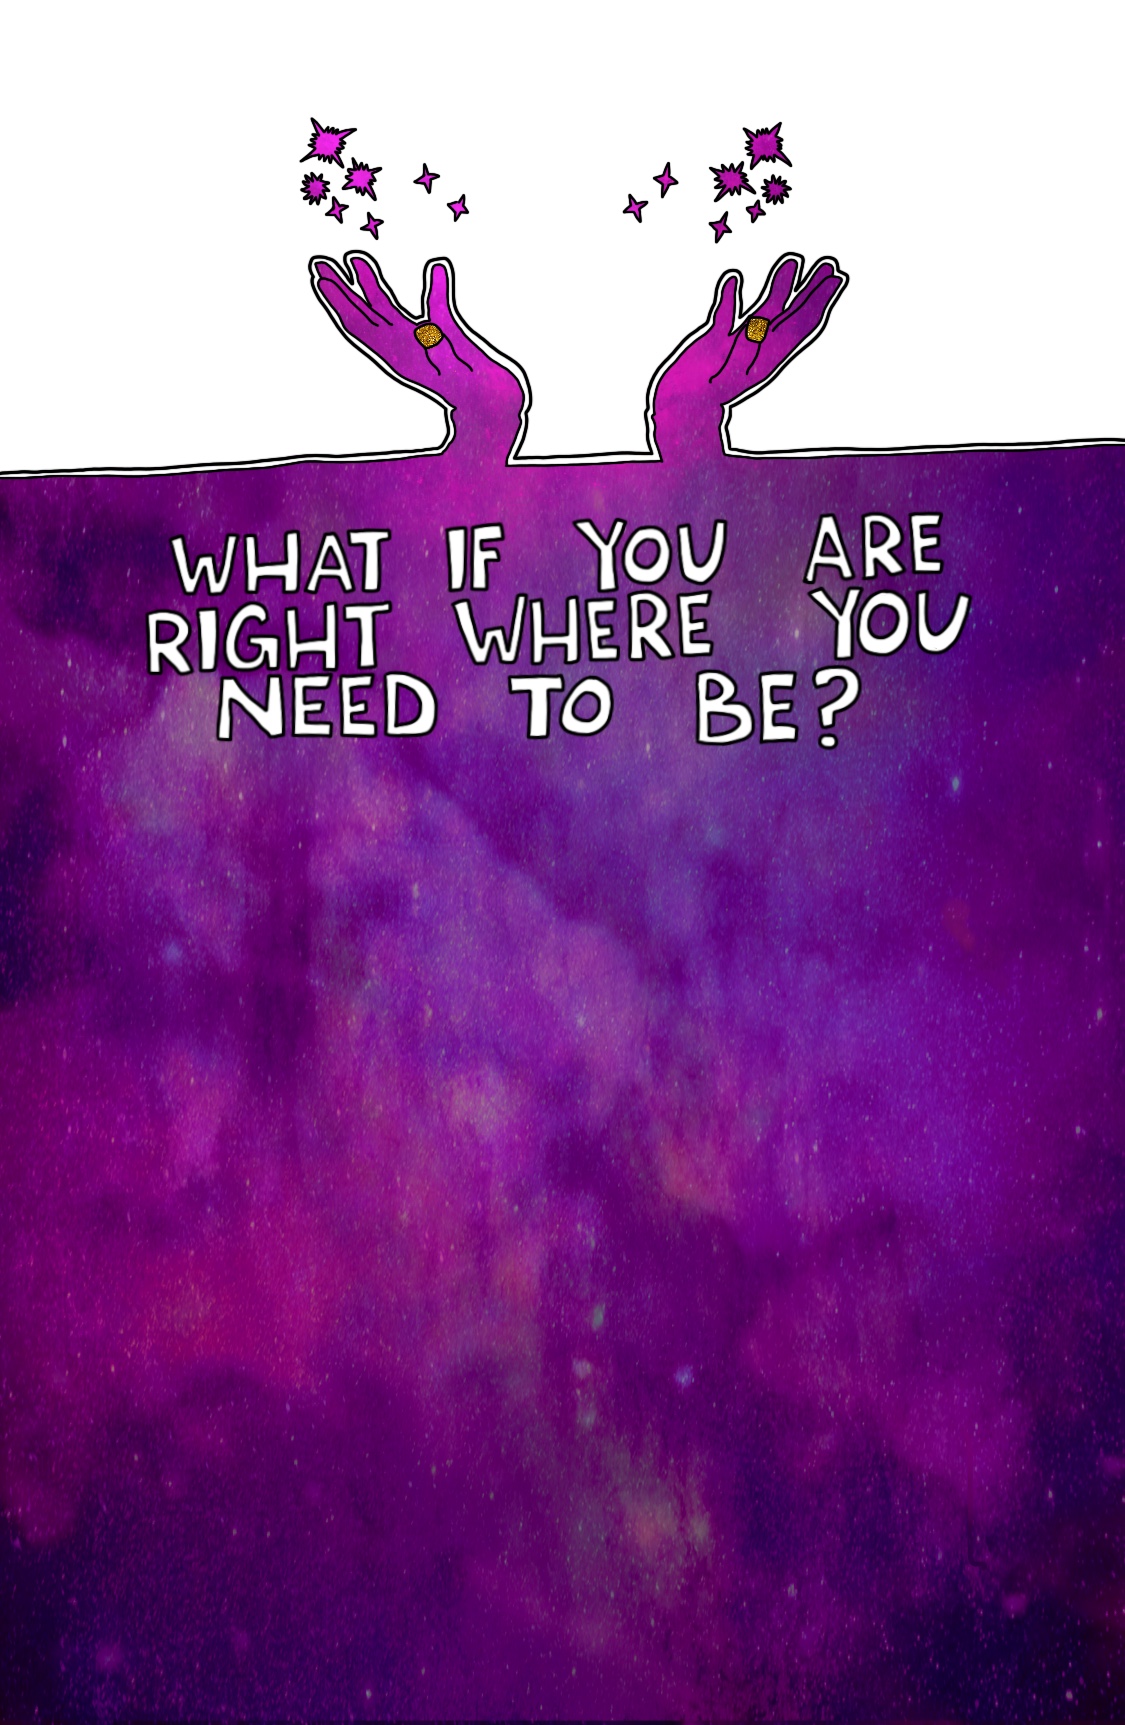 Journal prompt: What if you are right where you need to be?